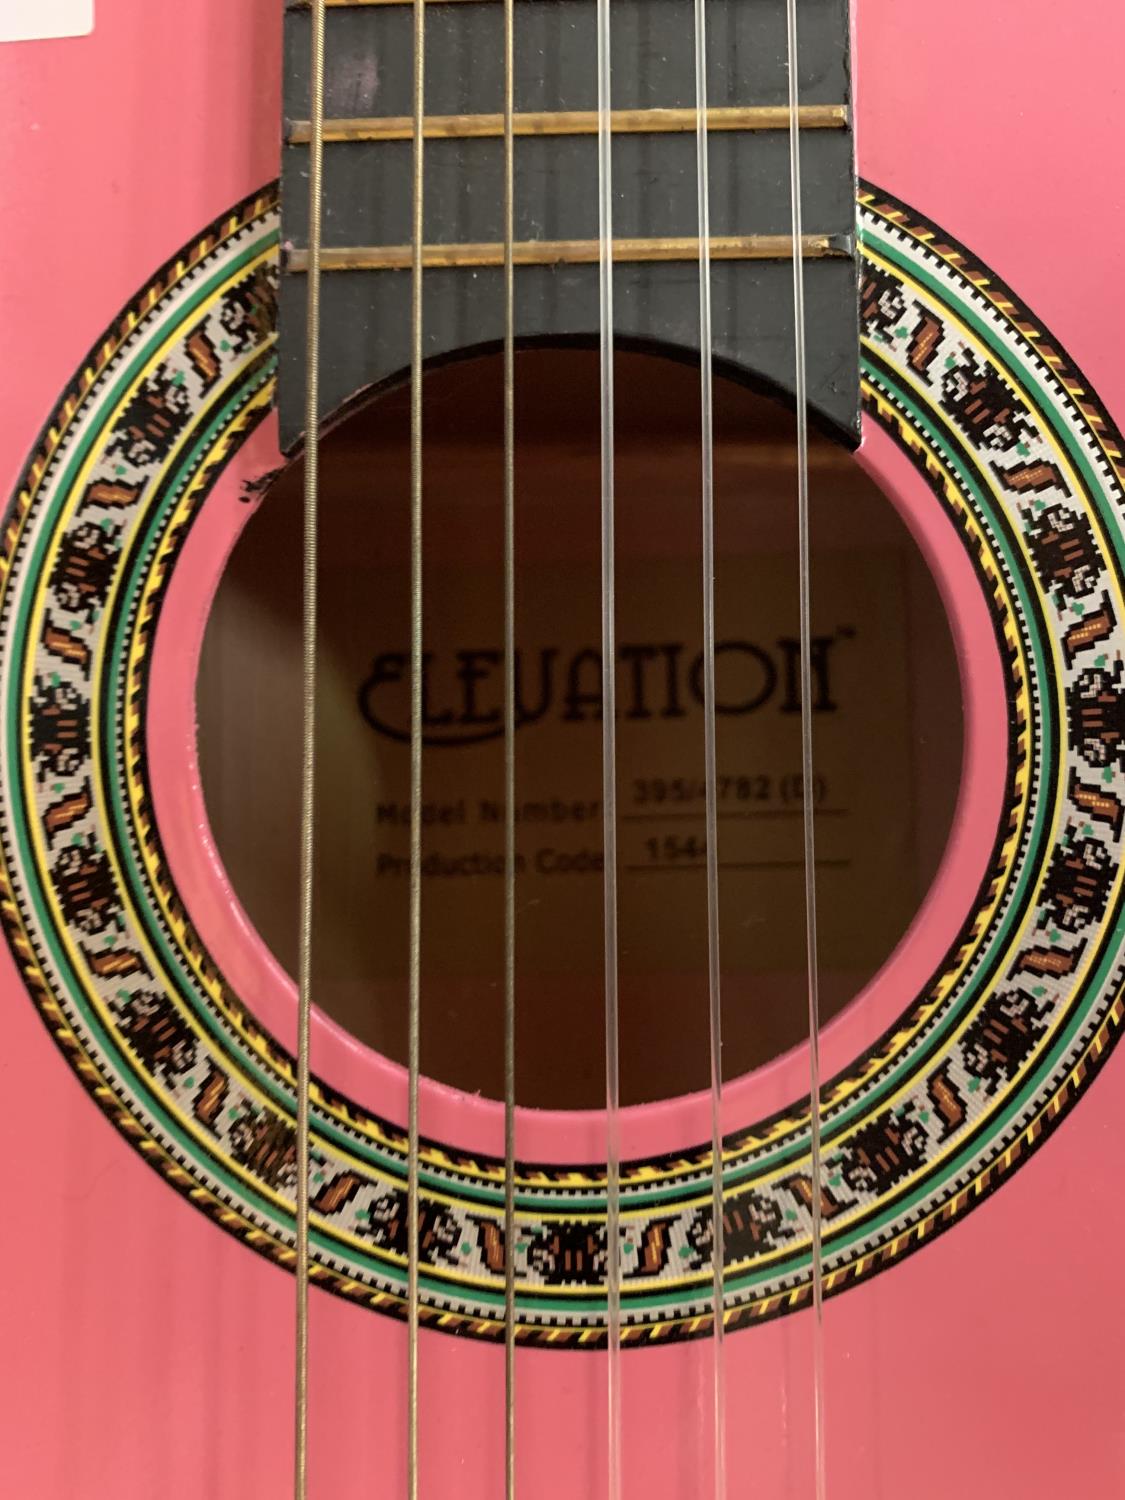 A NEW AND BOXED PINK ELEVATION 36 INCH CLASSIC GUITAR - Image 2 of 4